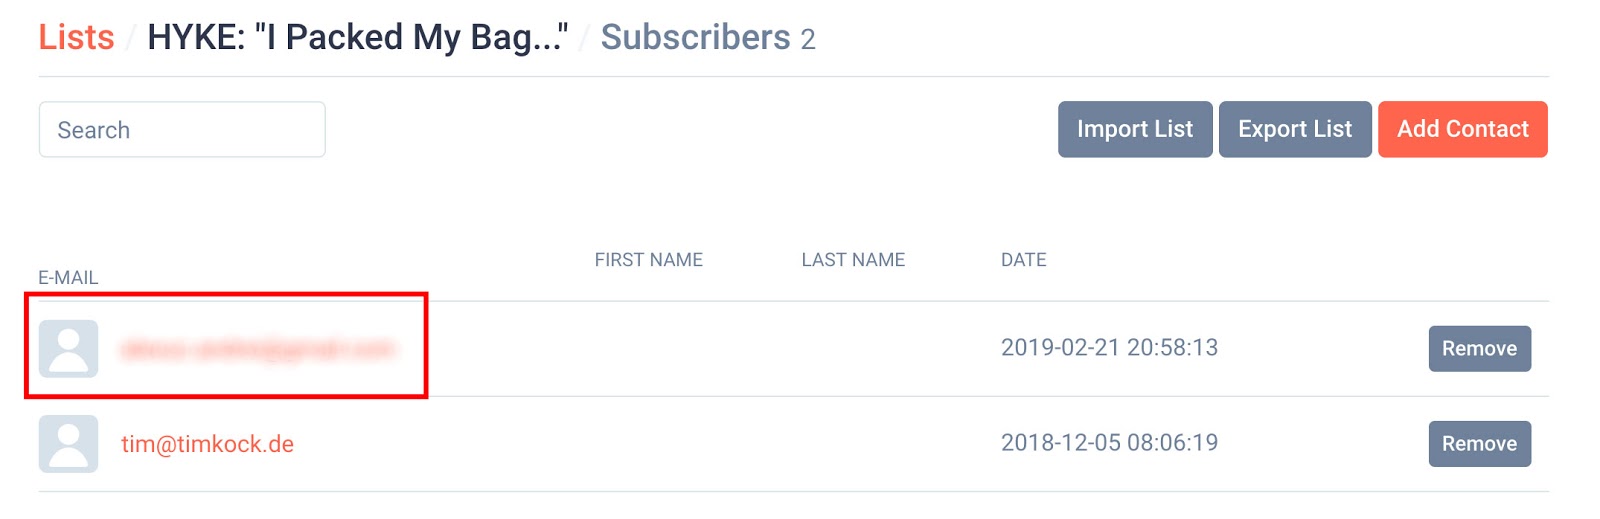 Screenshot showing subscribers for an email list